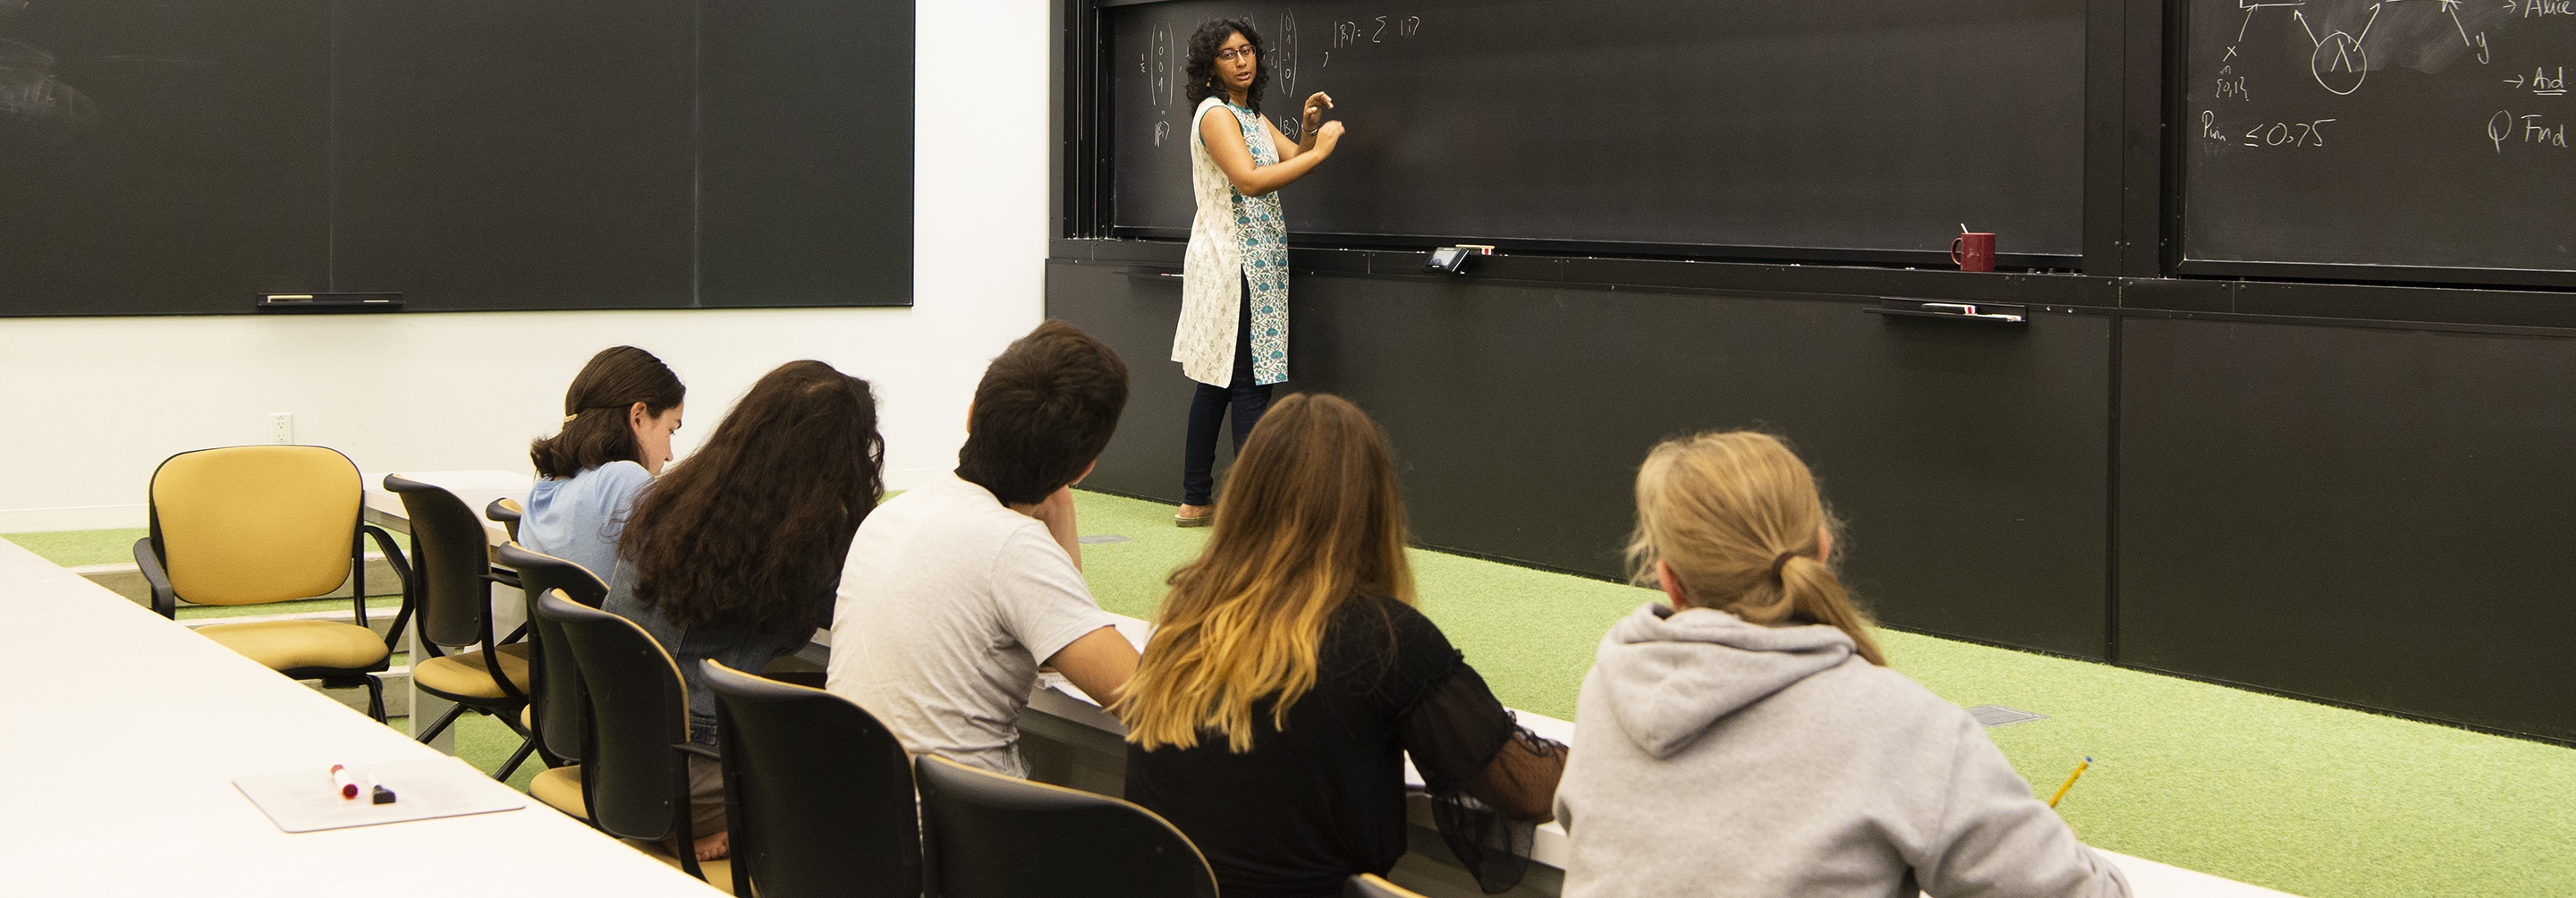 Woman teaching to a group of five students